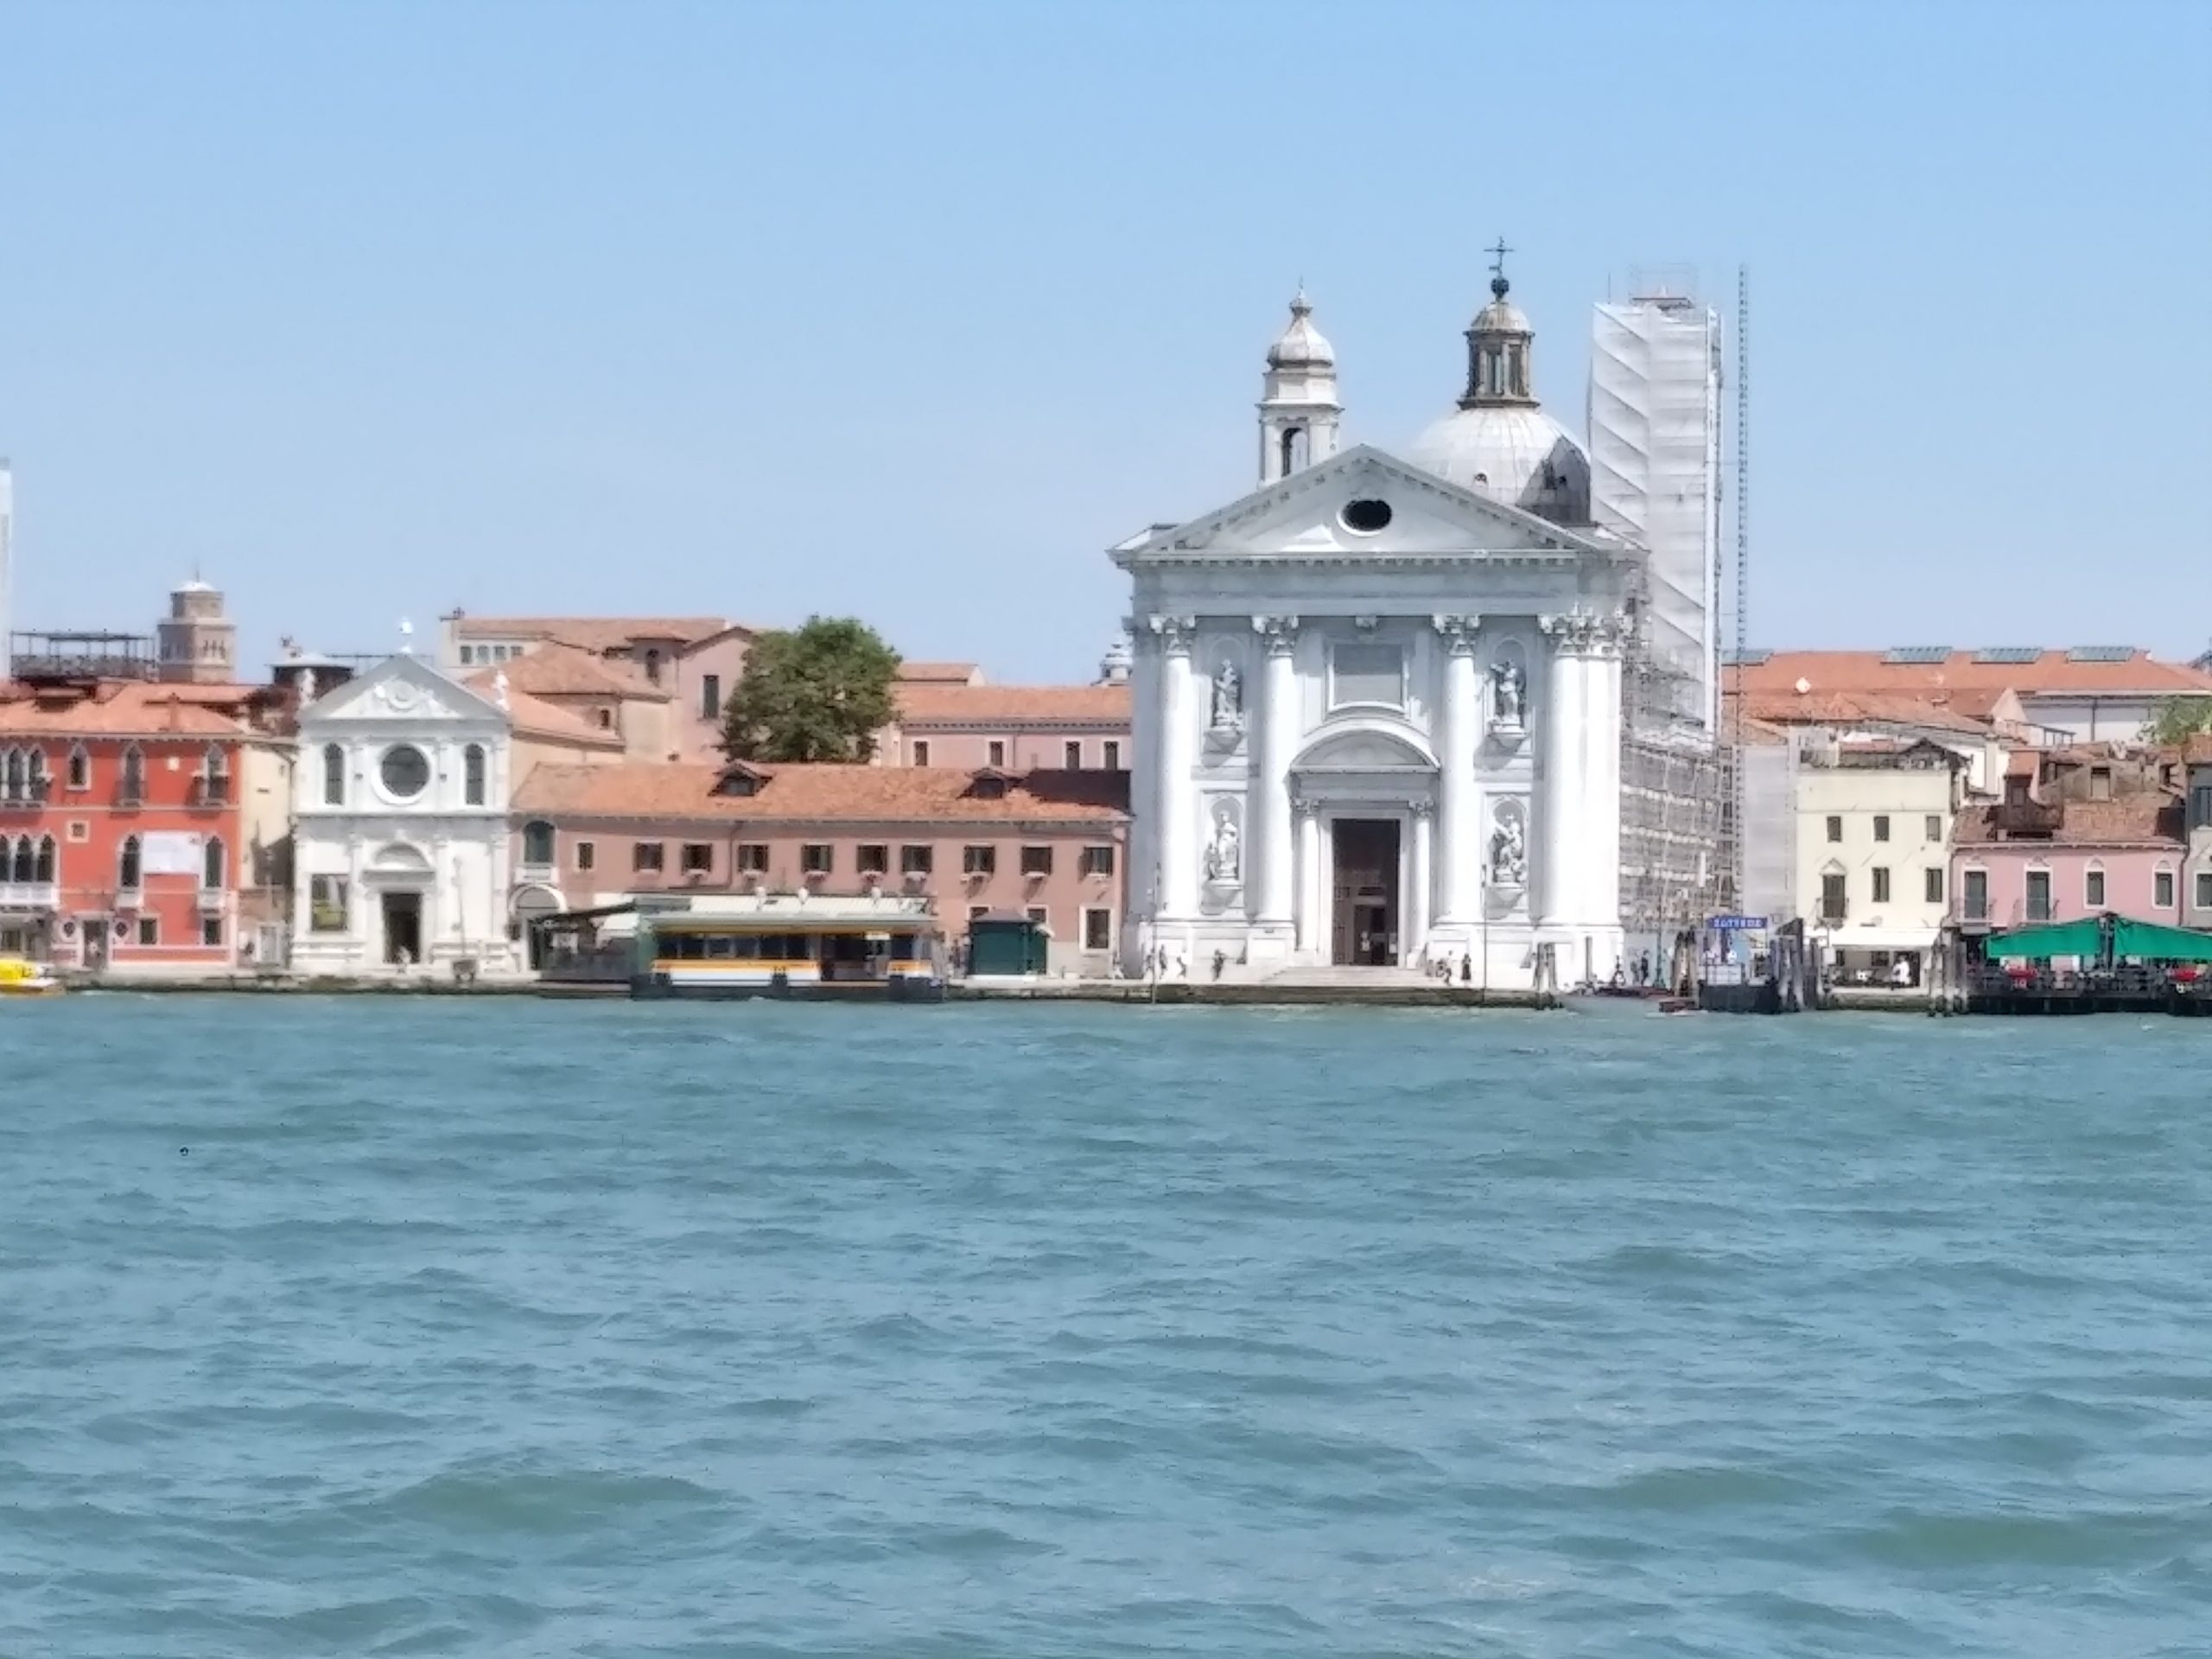 Despite the strike, a minimum vaporetto service was offered to go from island to island in Venice